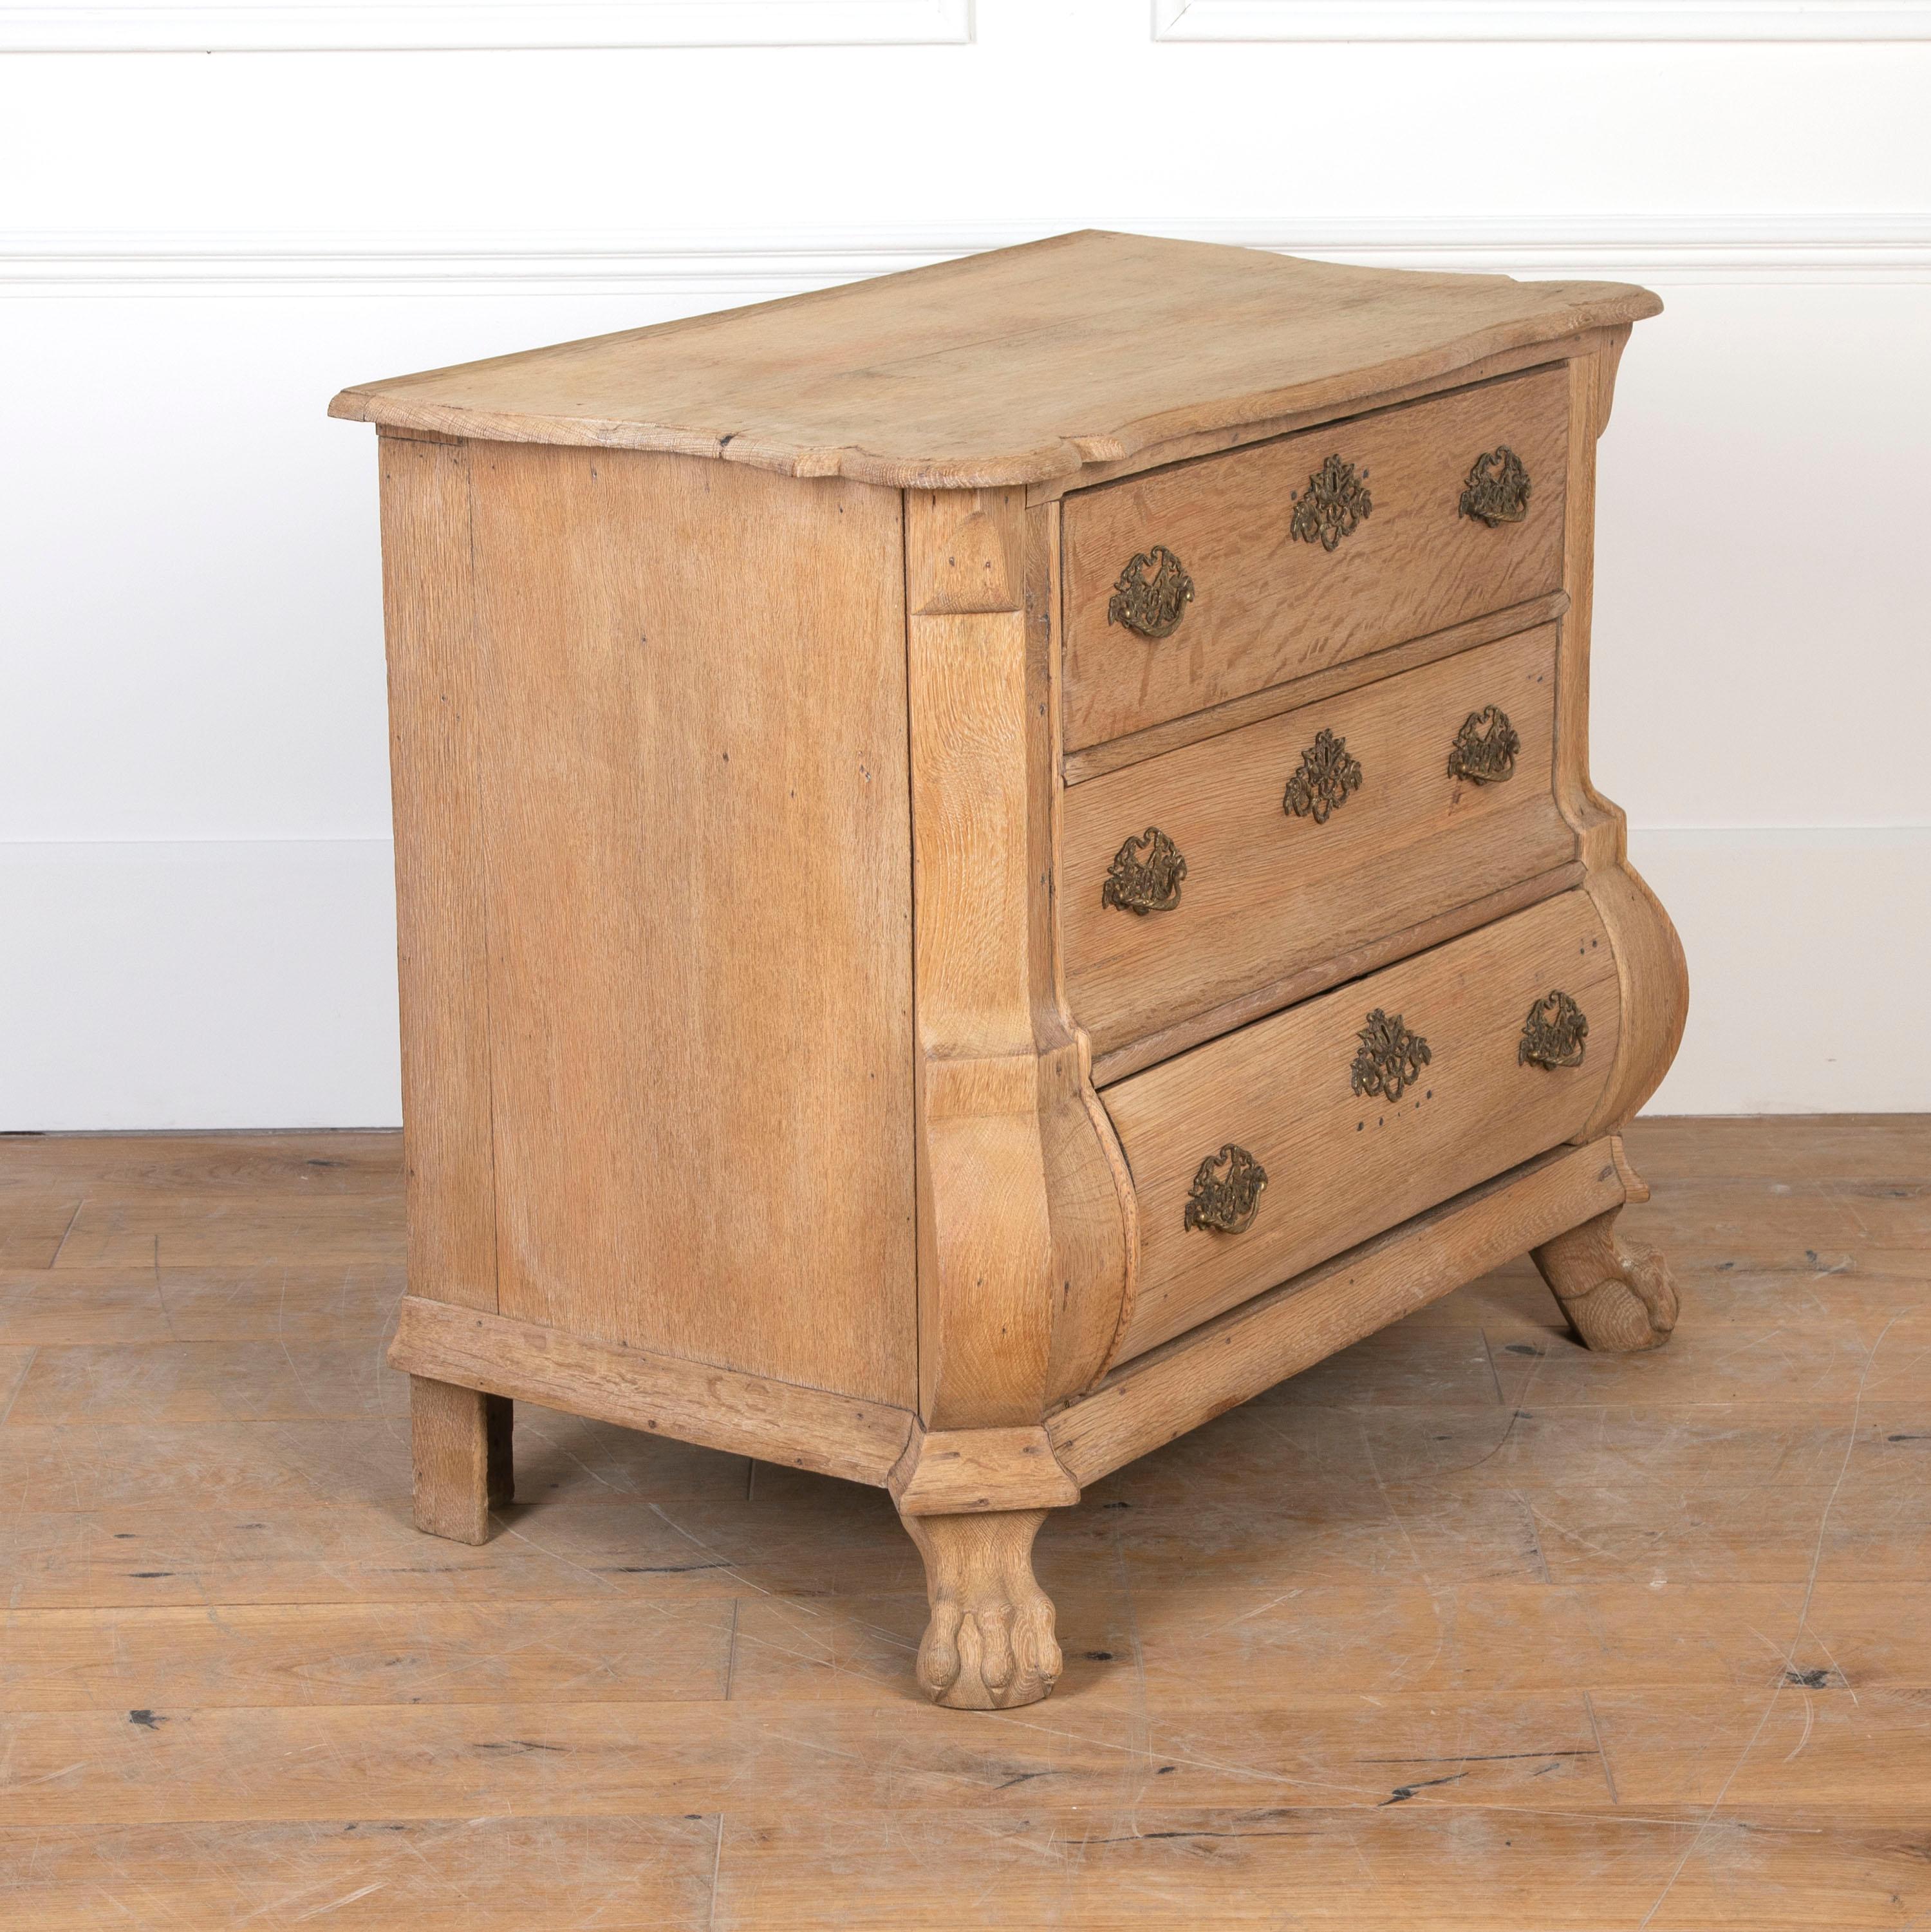 Small early 19th Century Dutch bombe commode.
This commode is composed of solid bleached oak with its original brass fittings.
The whole is supported on hand-carved claw feet. This is a robust piece with strong character, that will undoubtedly add